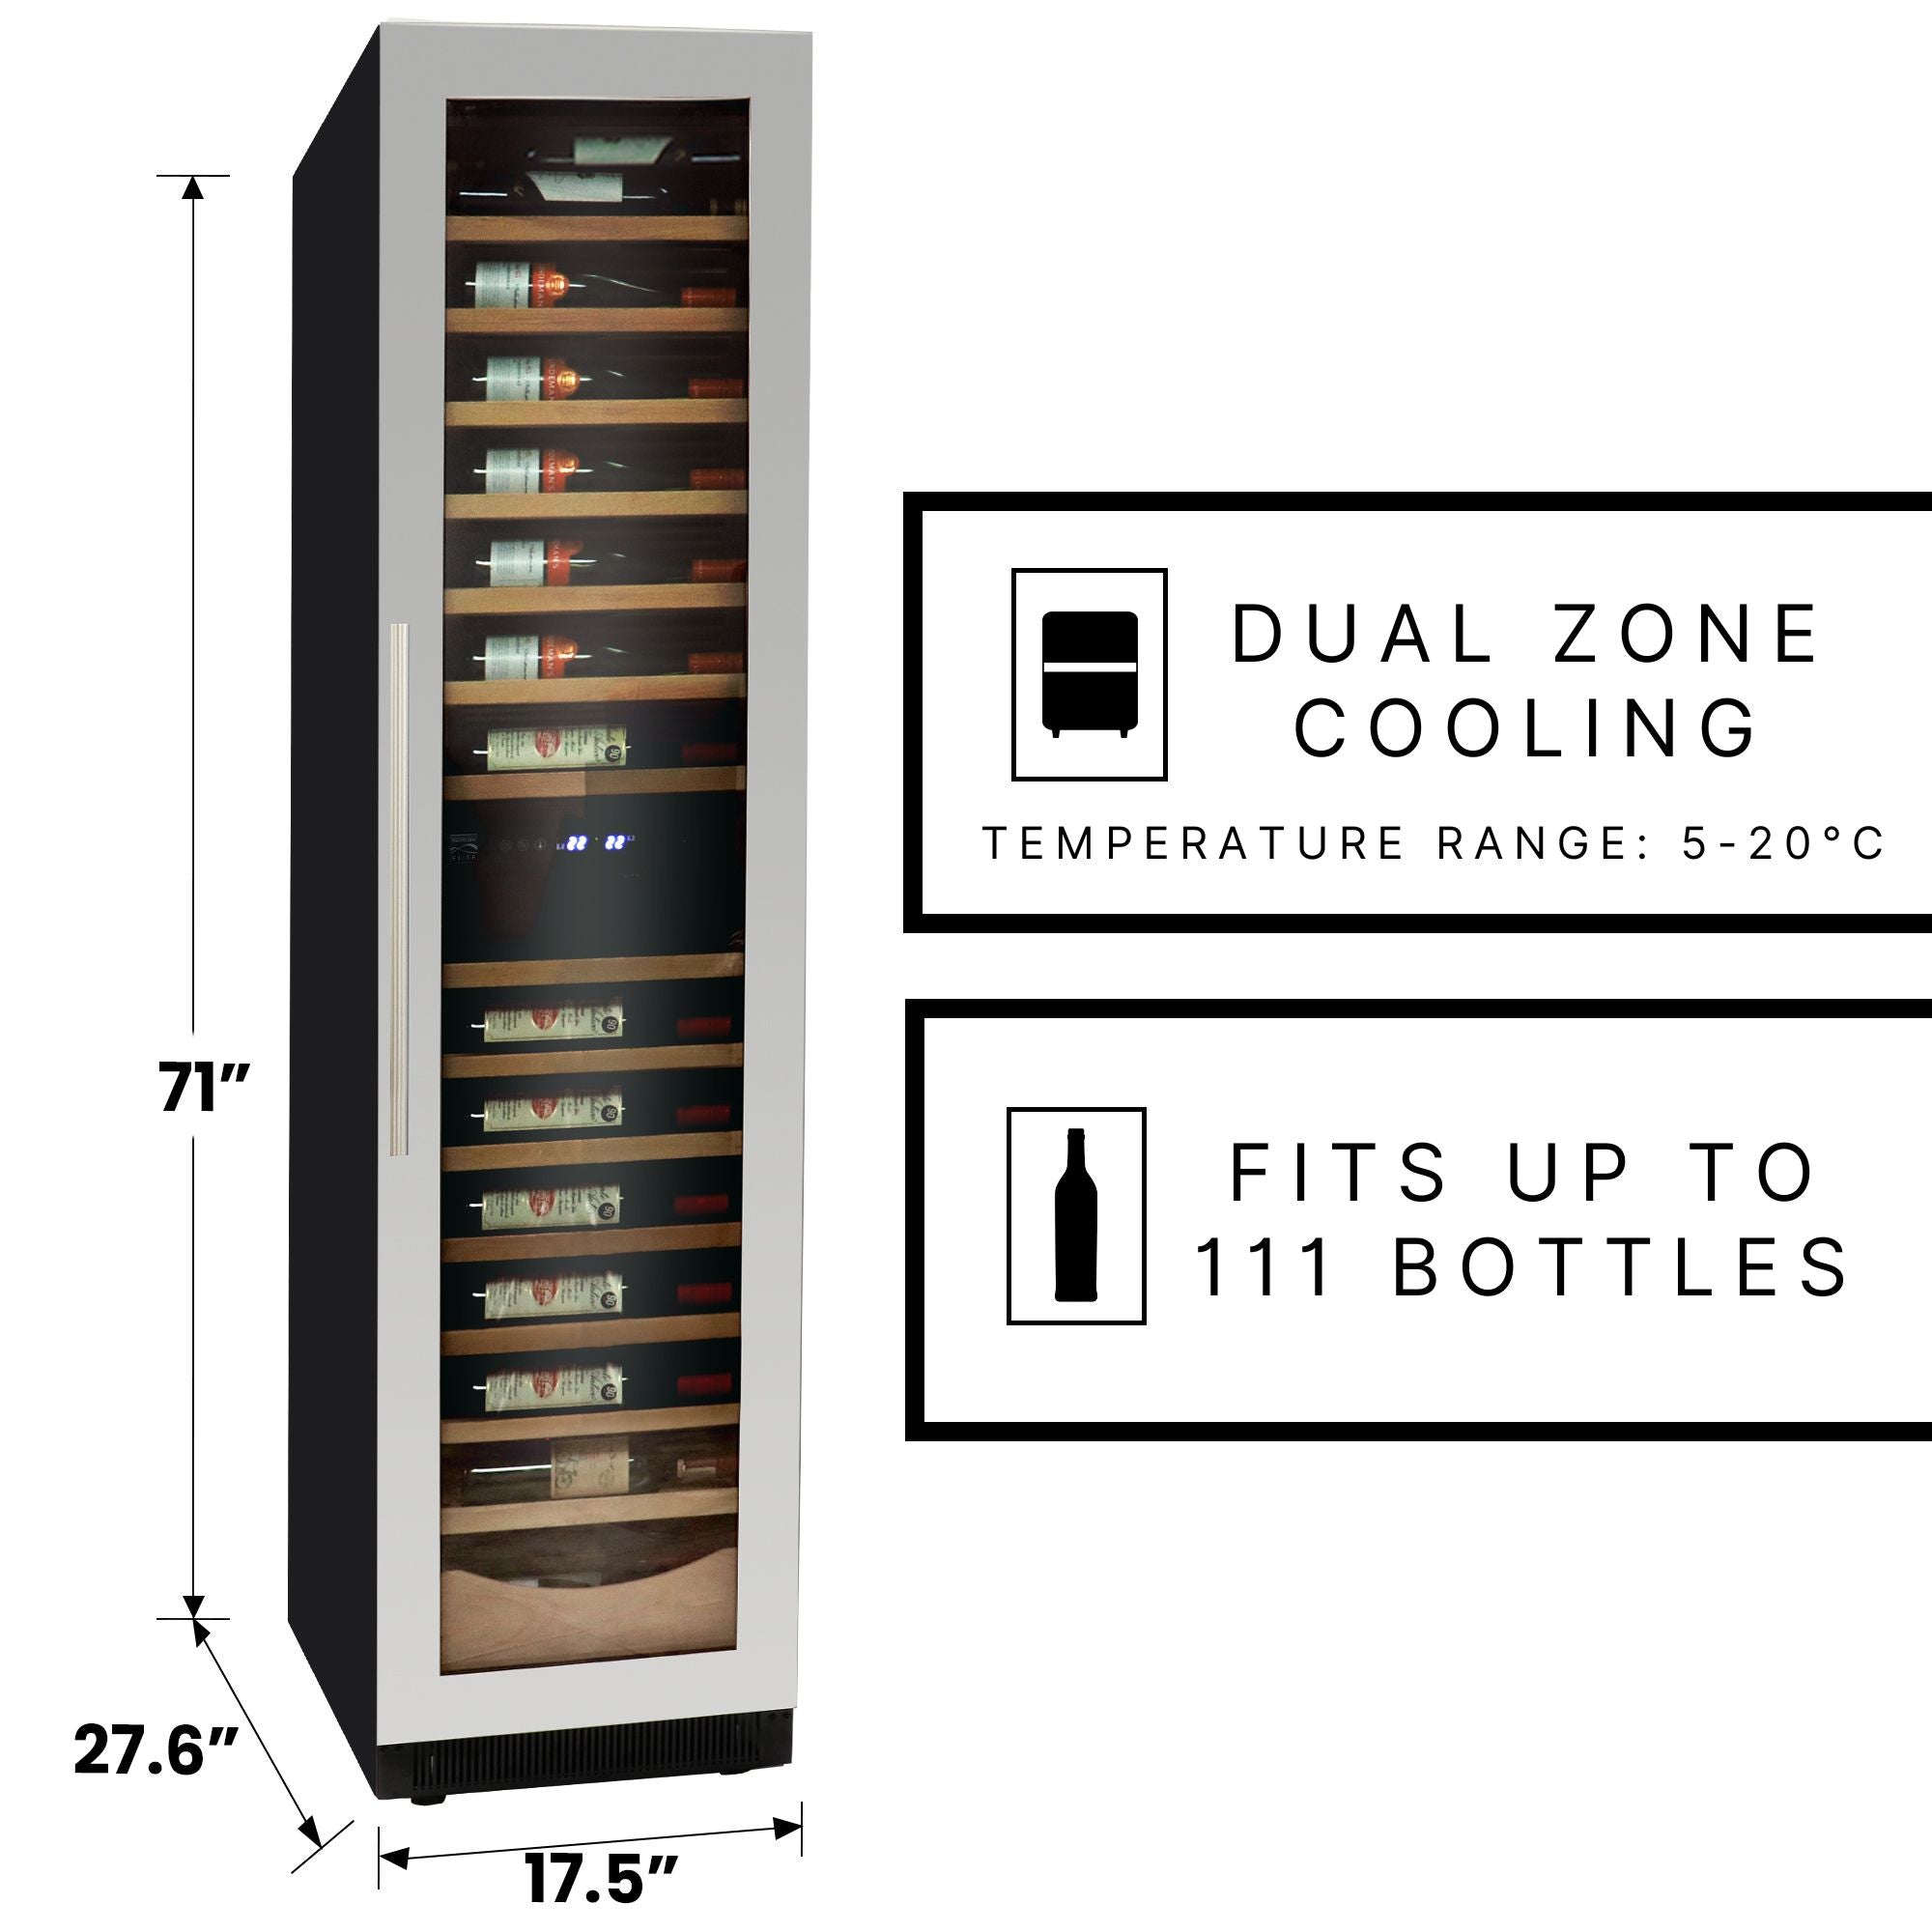 Kenmore Elite 18 inch premium wine fridge on a white background with dimensions labeled. Text and icons to the right describe, "Dual zone cooling: temperature range 5-20C" and "fits up to 111 bottles"